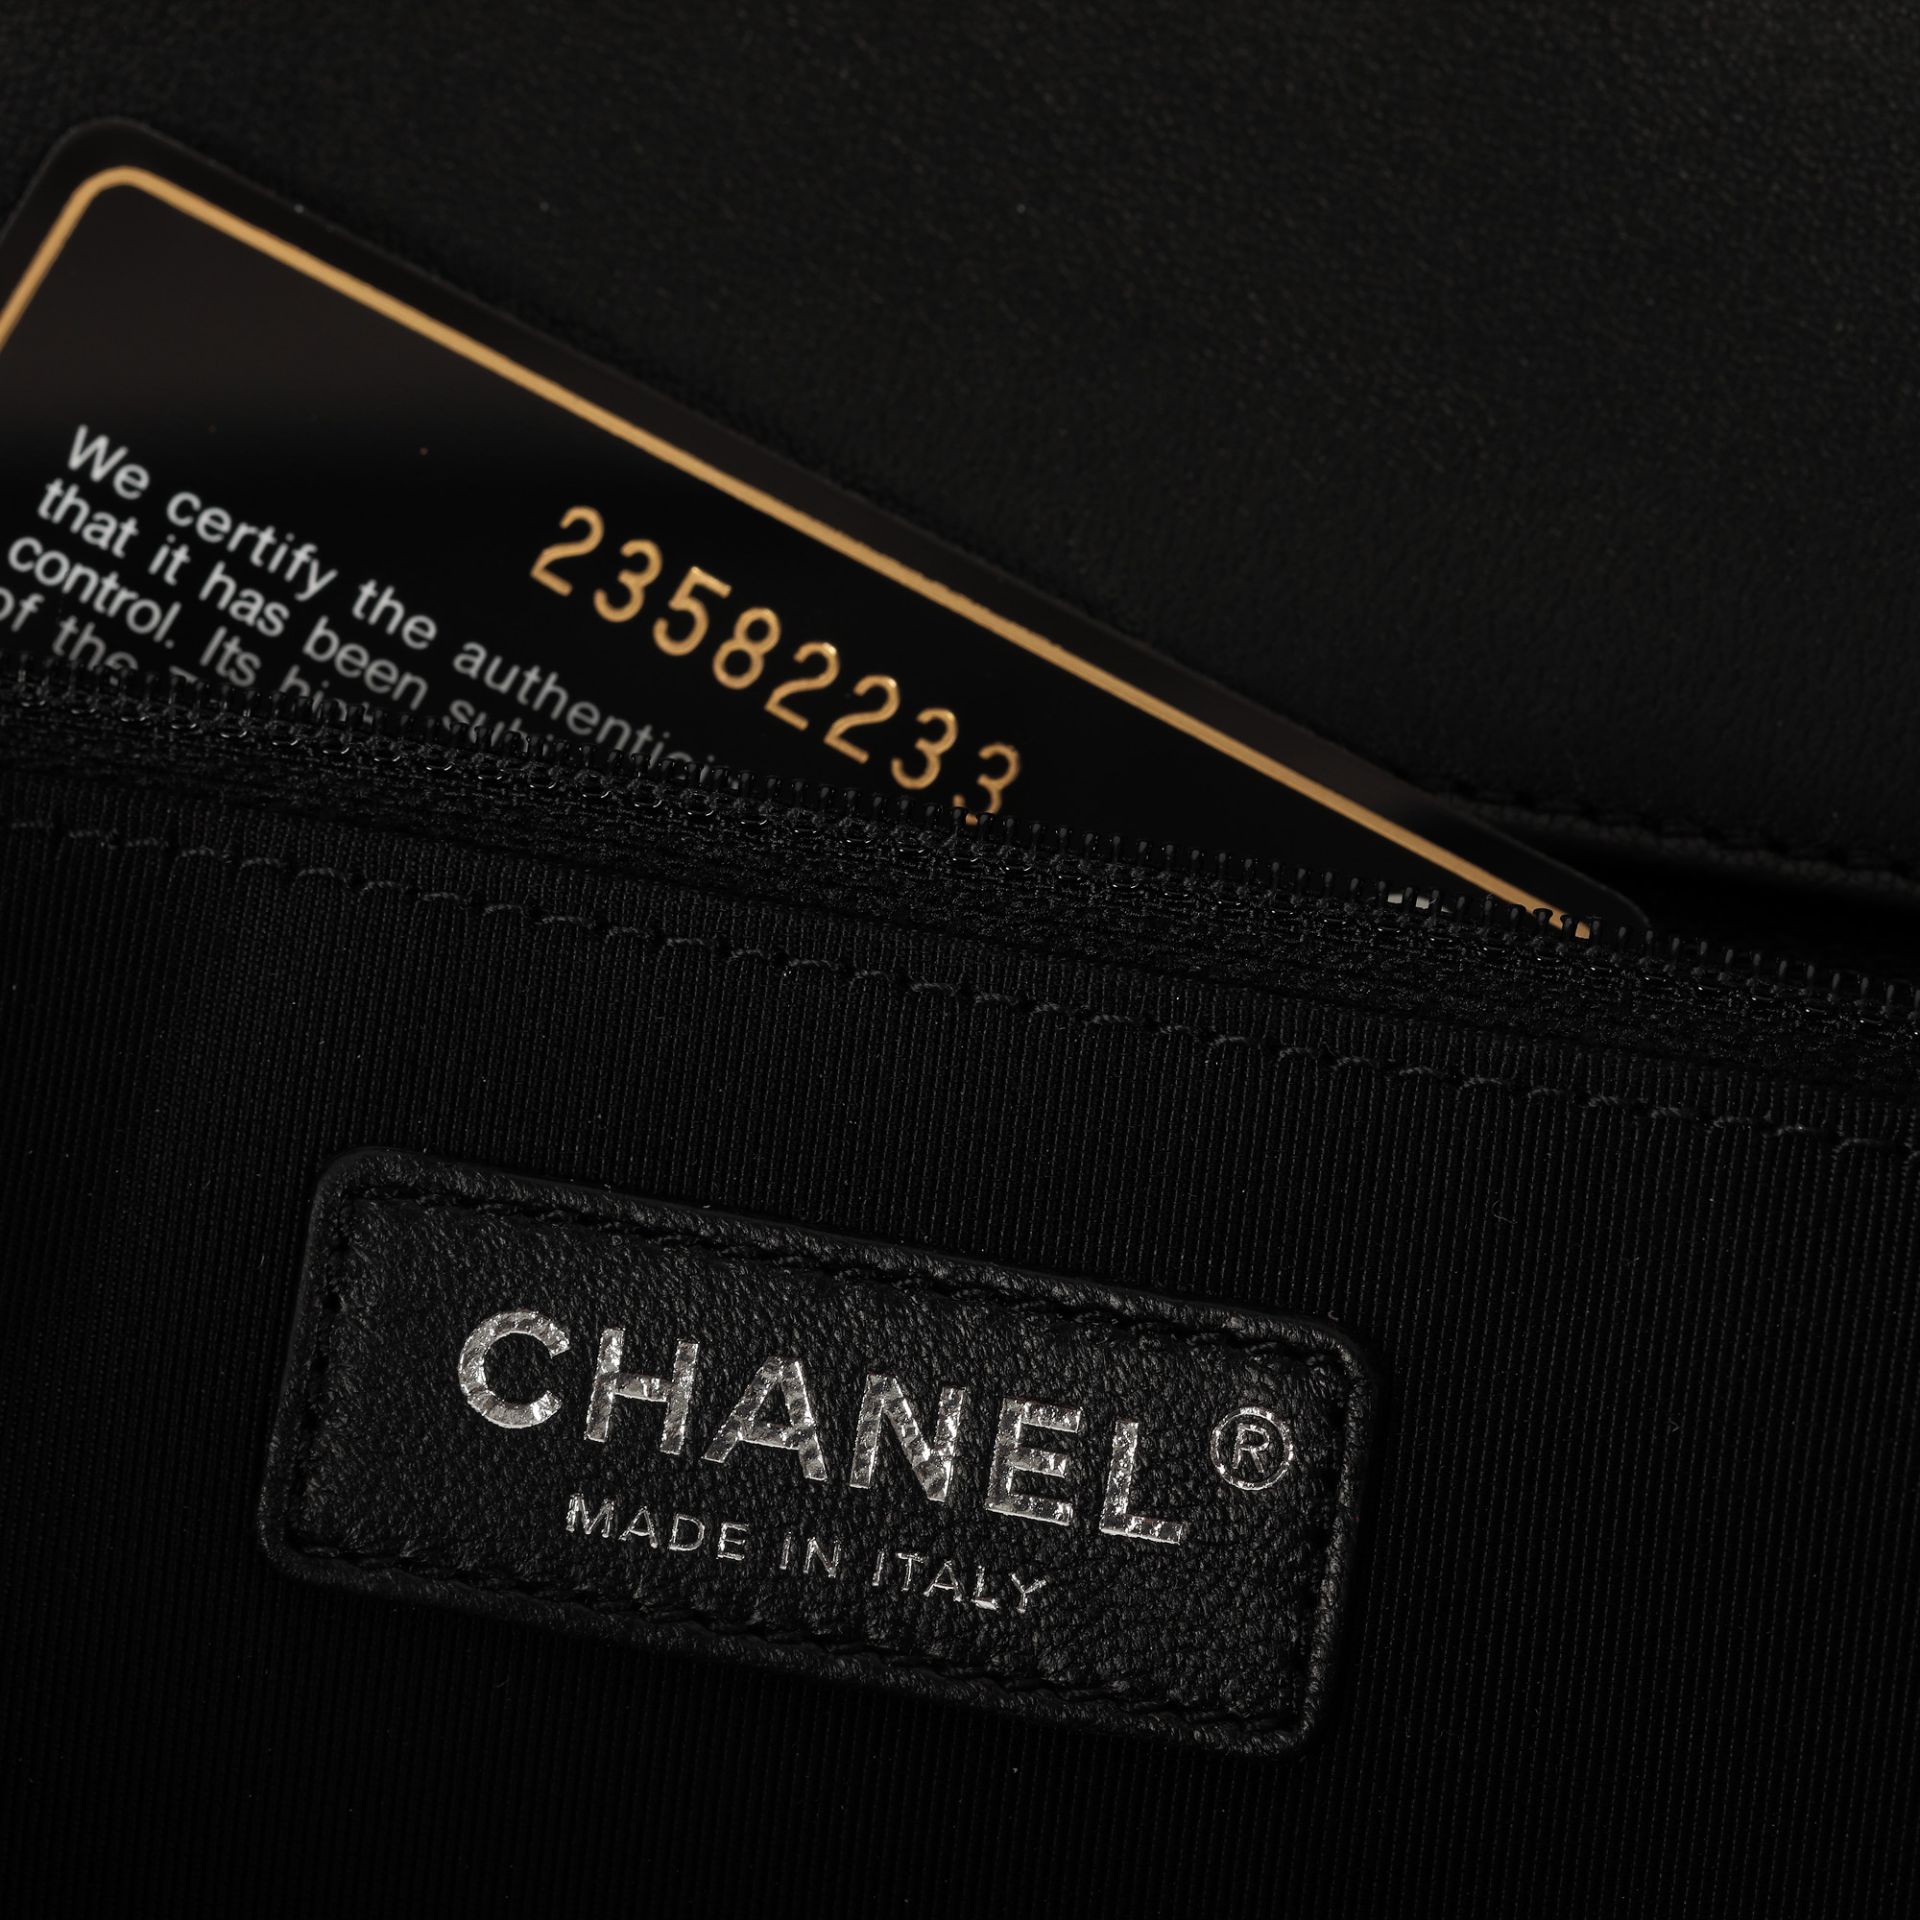 "Classic Flap Bag" - Chanel bag, quilted leather, black, with coloured resin details, authenticity c - Image 6 of 6